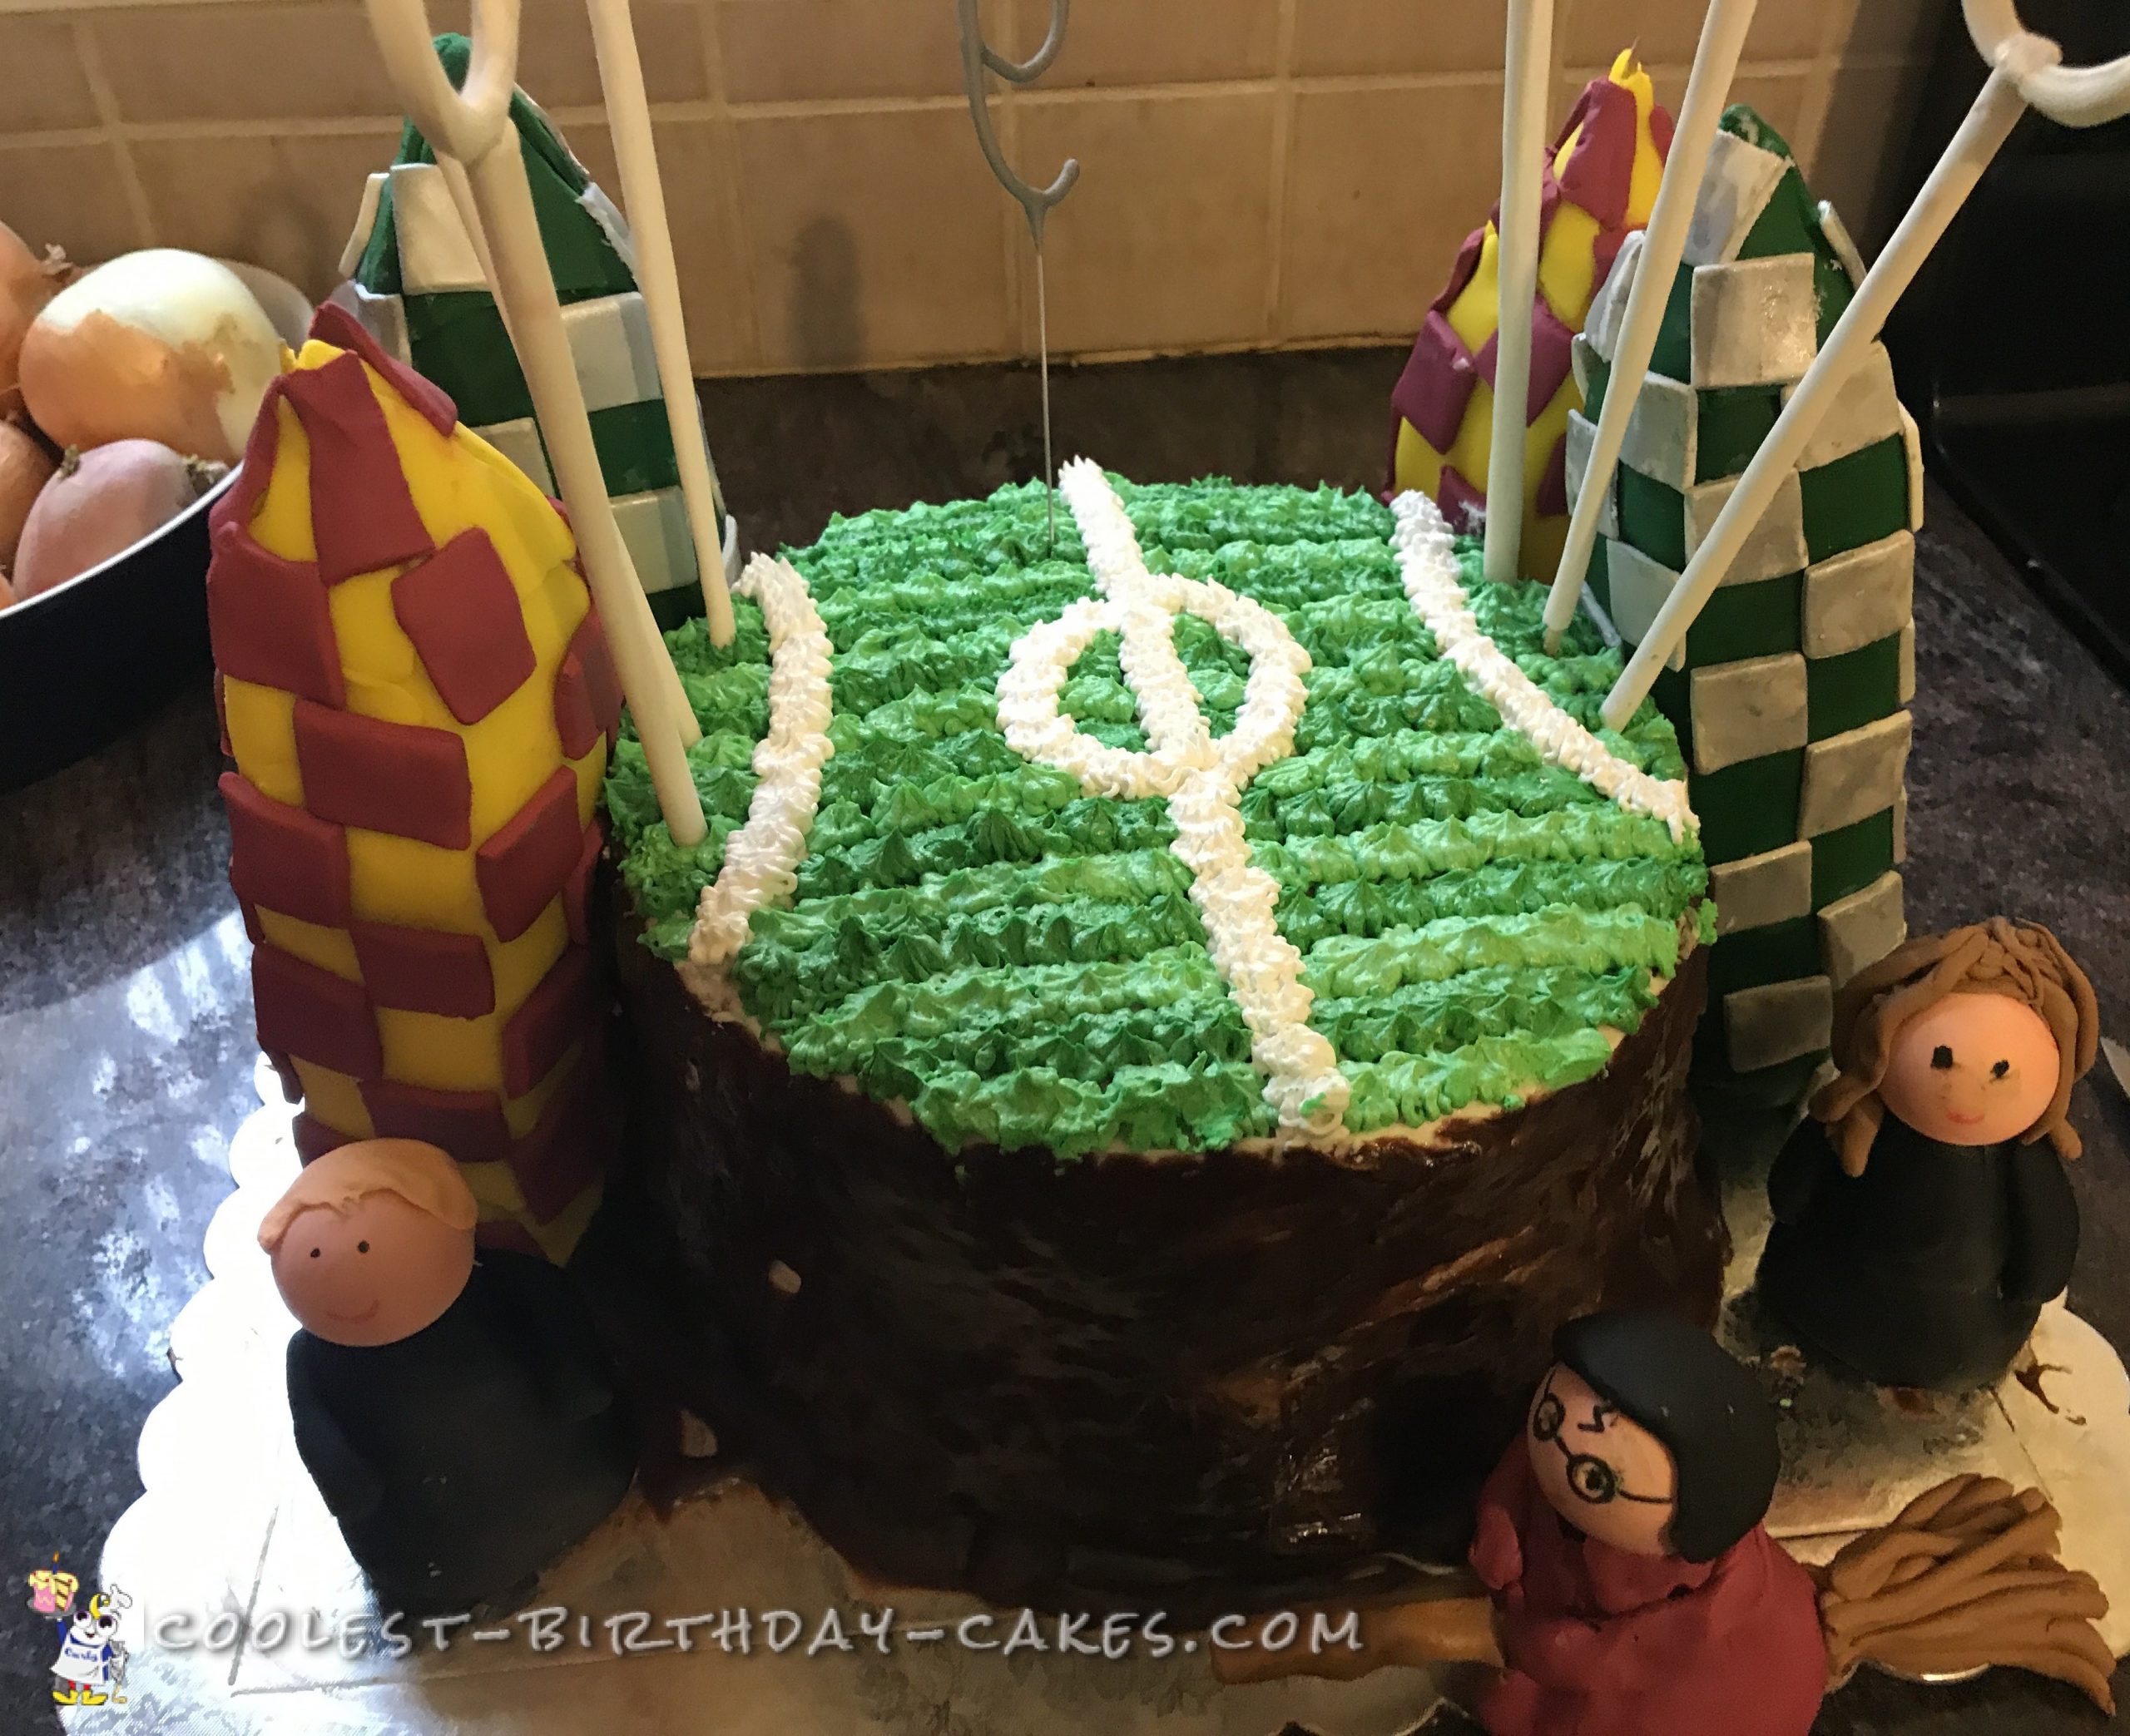 Cool Quidditch Cake With Harry, Ron and Hermione